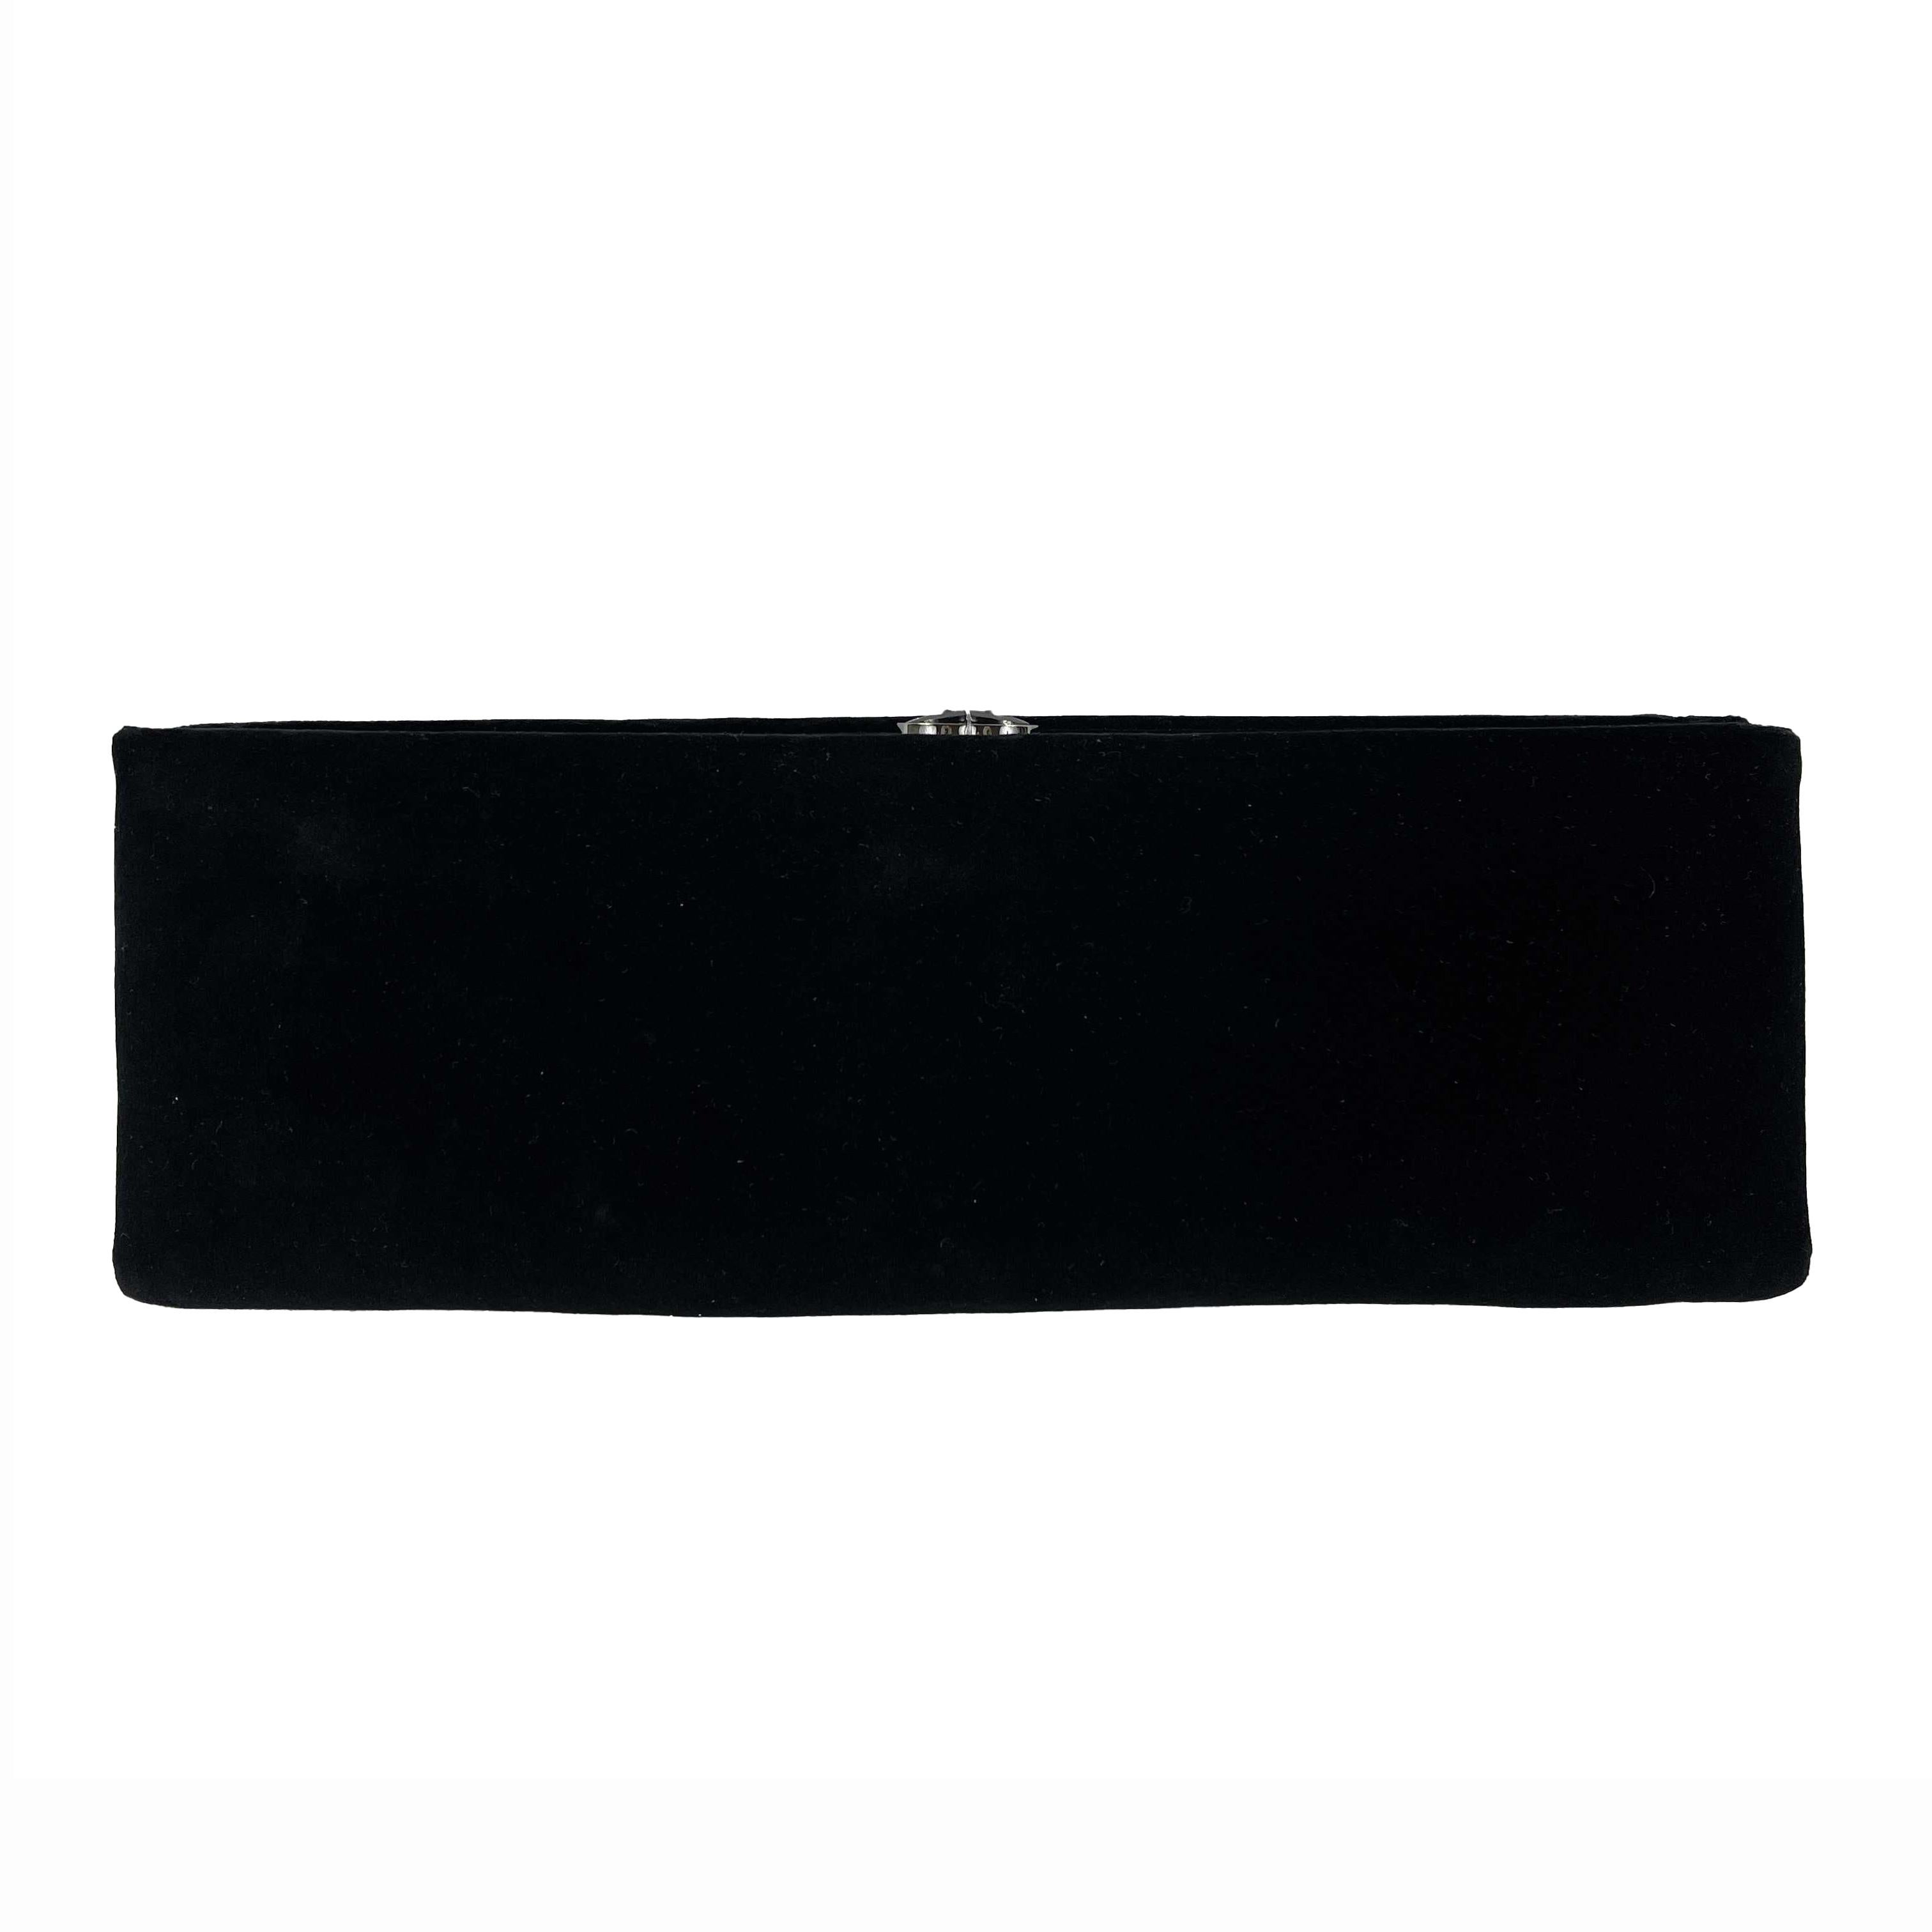 * Fall Metiers d'Art 2015 Collection.
* This clutch is crafted of sumptuous black velvet fabric.
* Features embellished feathers, sequins and crystals in the shape of butterflies and feathers.
* Opens with a faceted black Chanel CC push lock to a